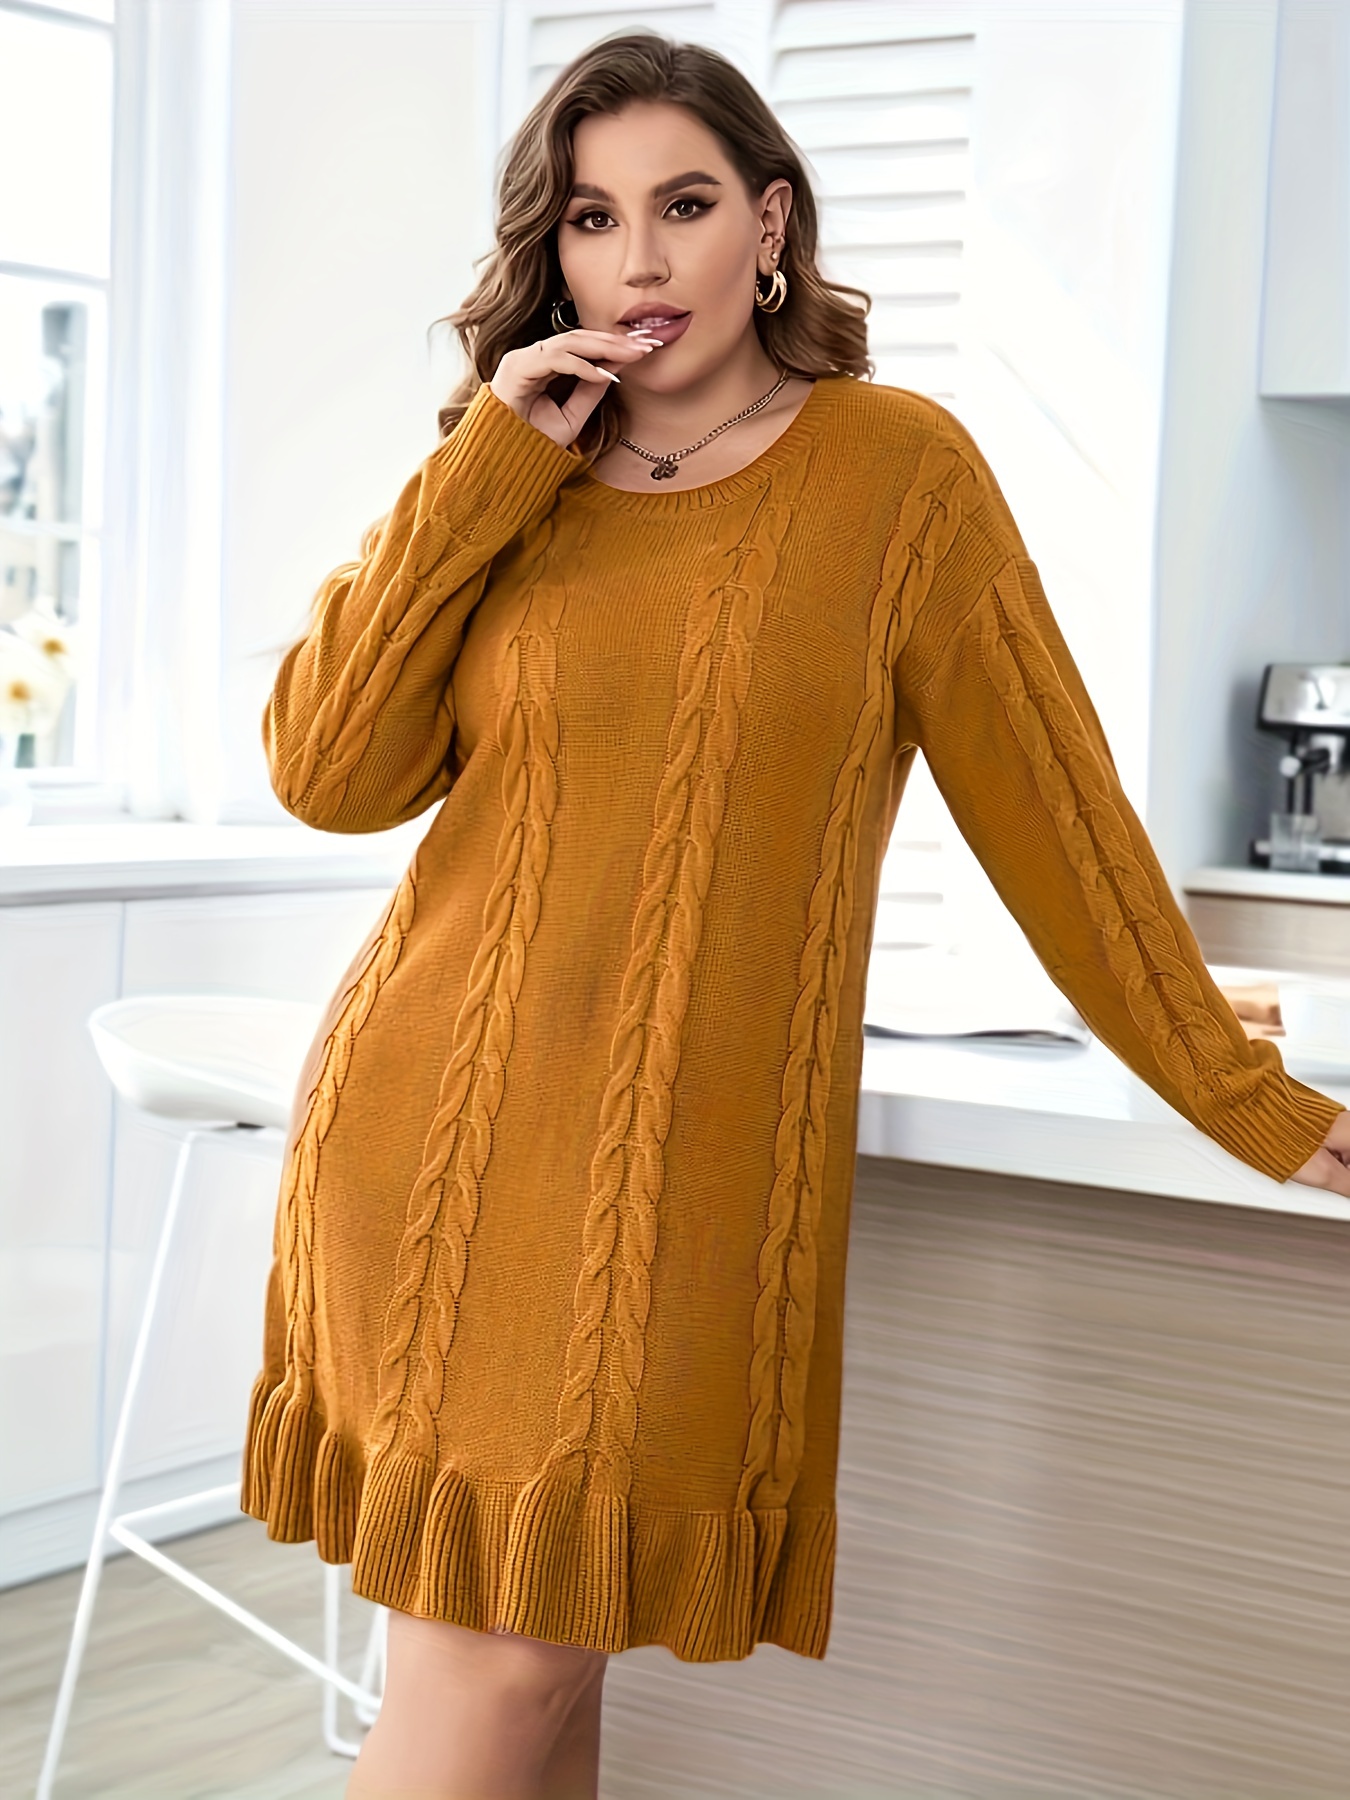 Plus Size Casual Sweater Dress, Women's Plus Solid Cable Knit